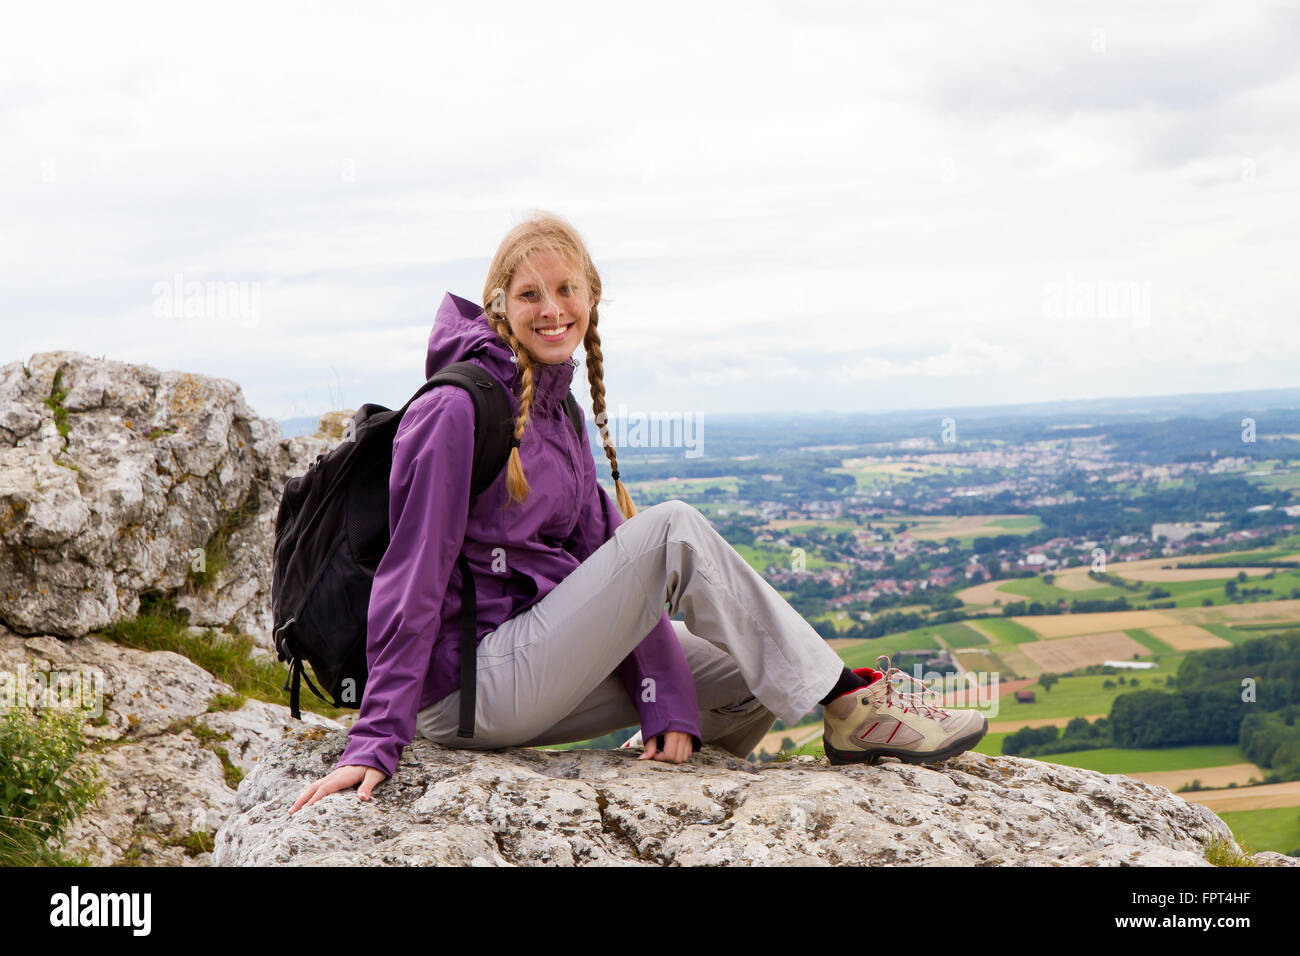 Young happy woman on a mountain peak Stock Photo